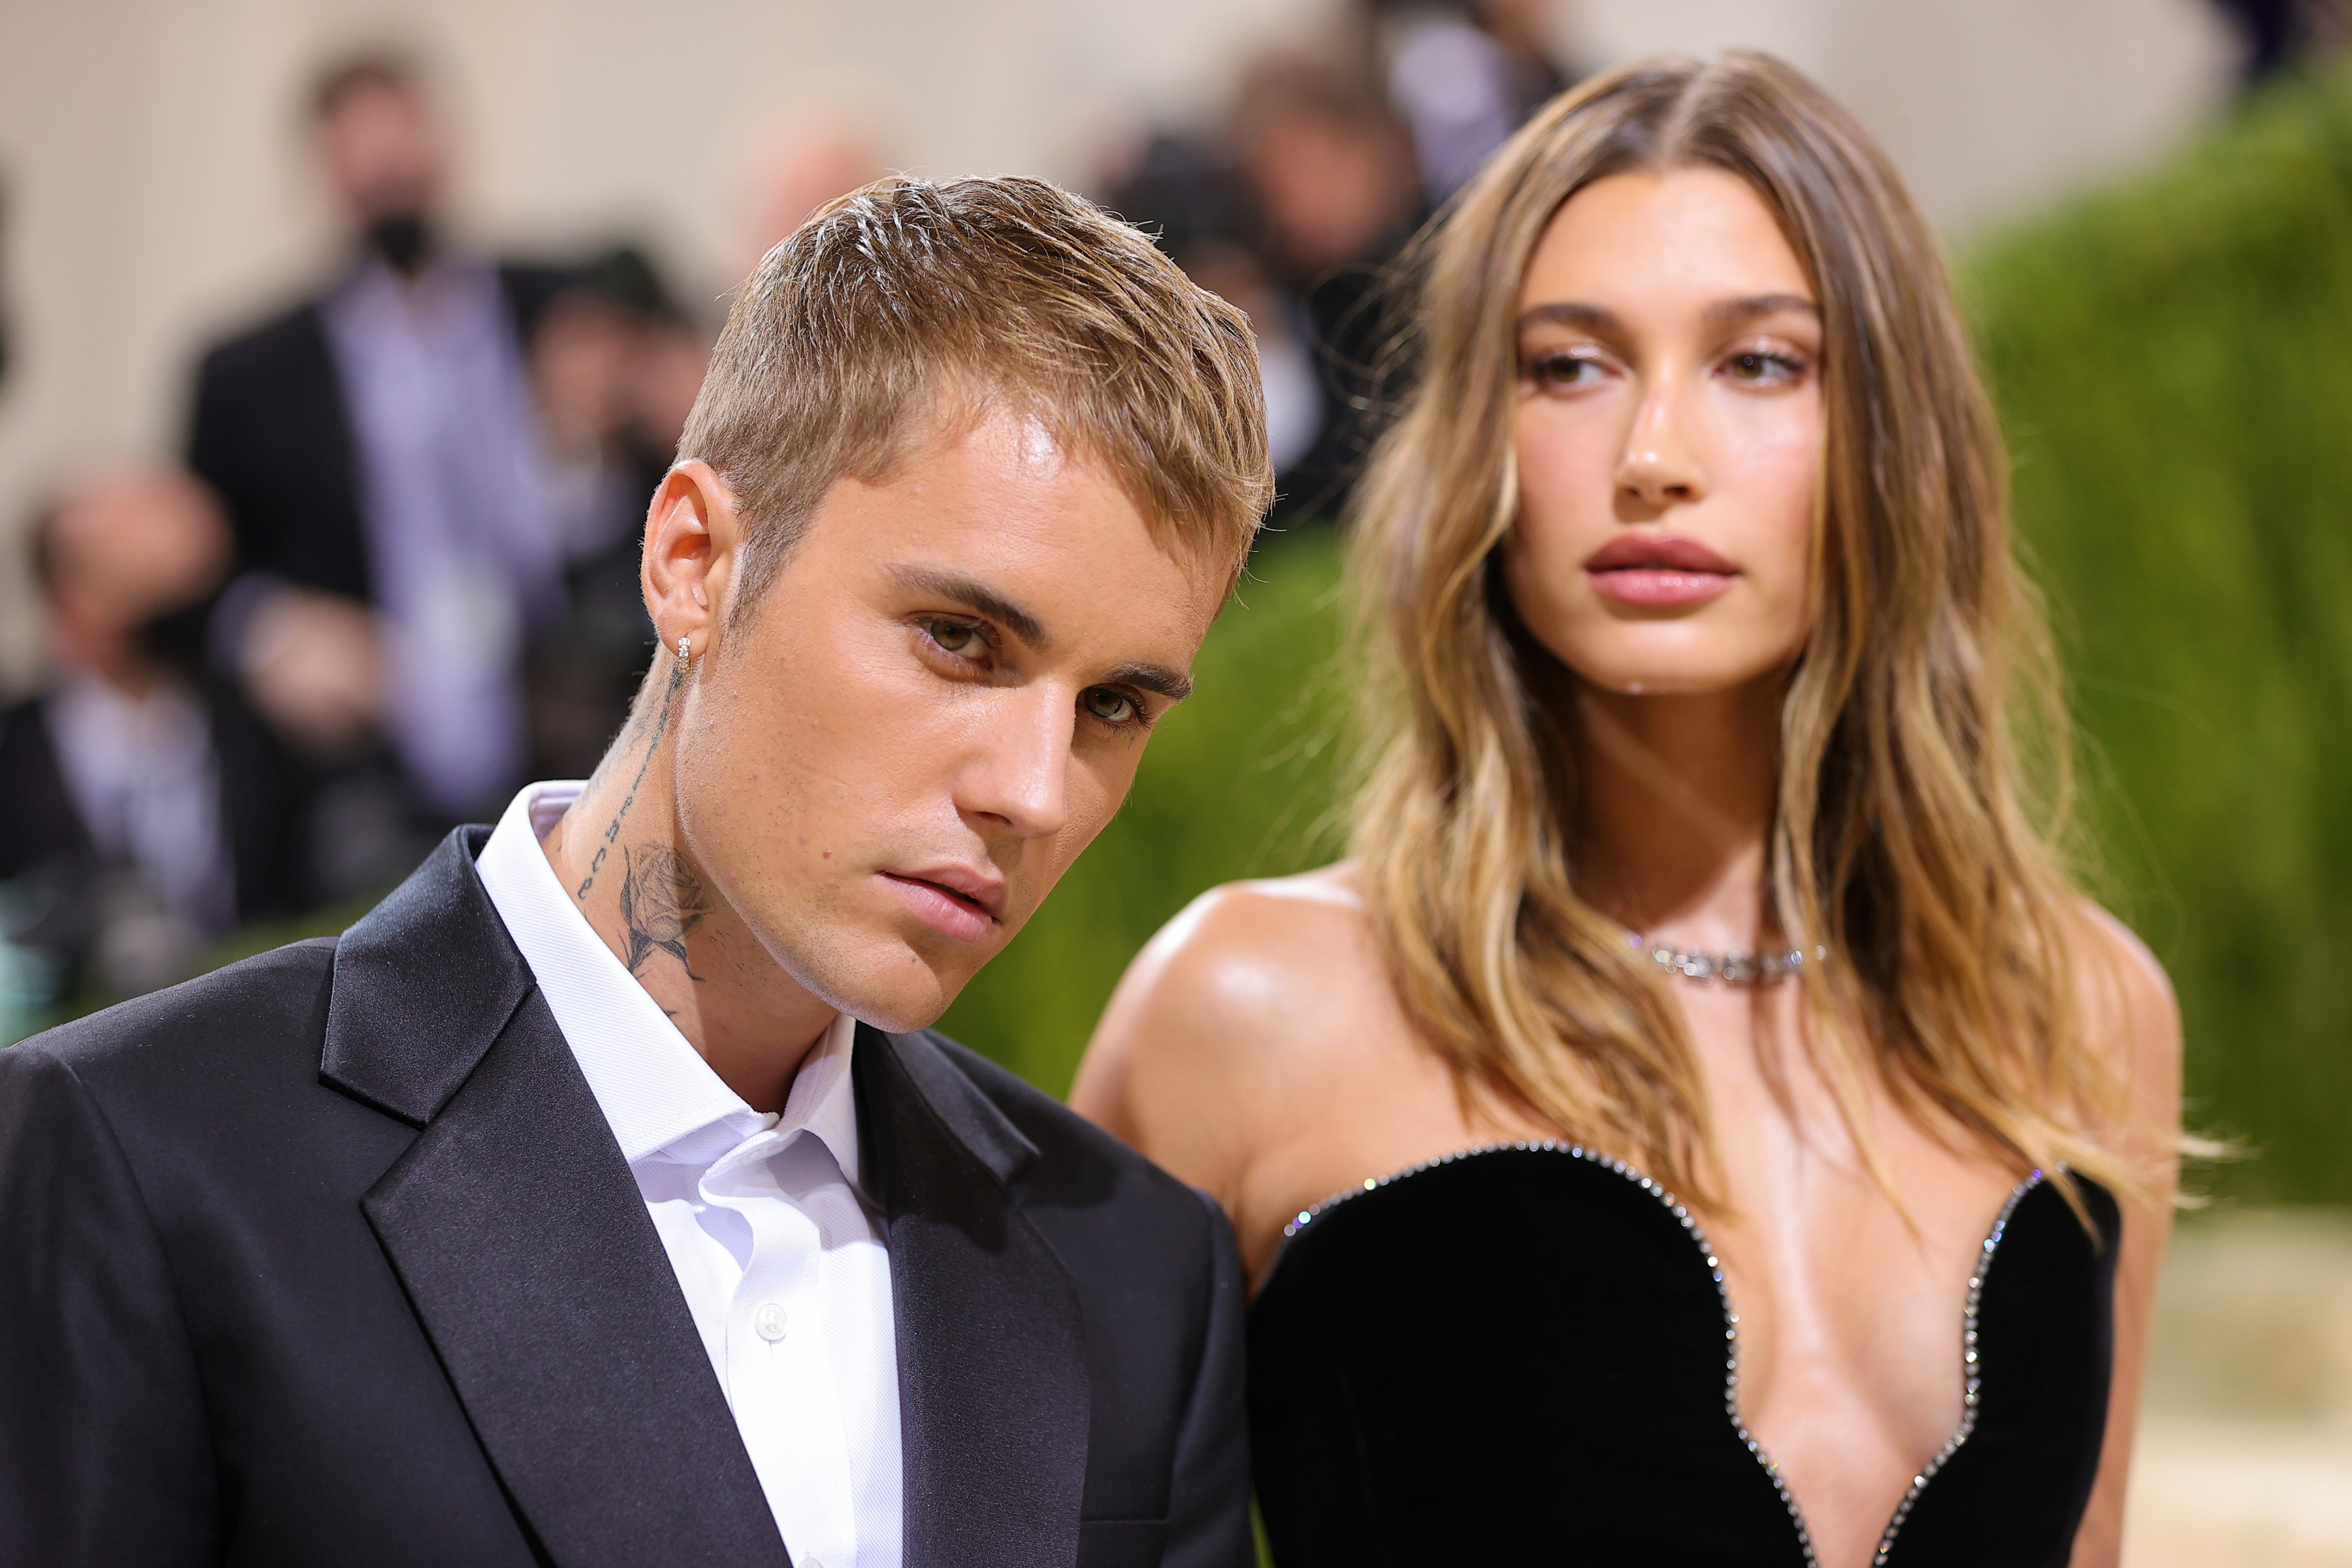 Chatter has also been swirling that Hailey and Justin are having marriage problems